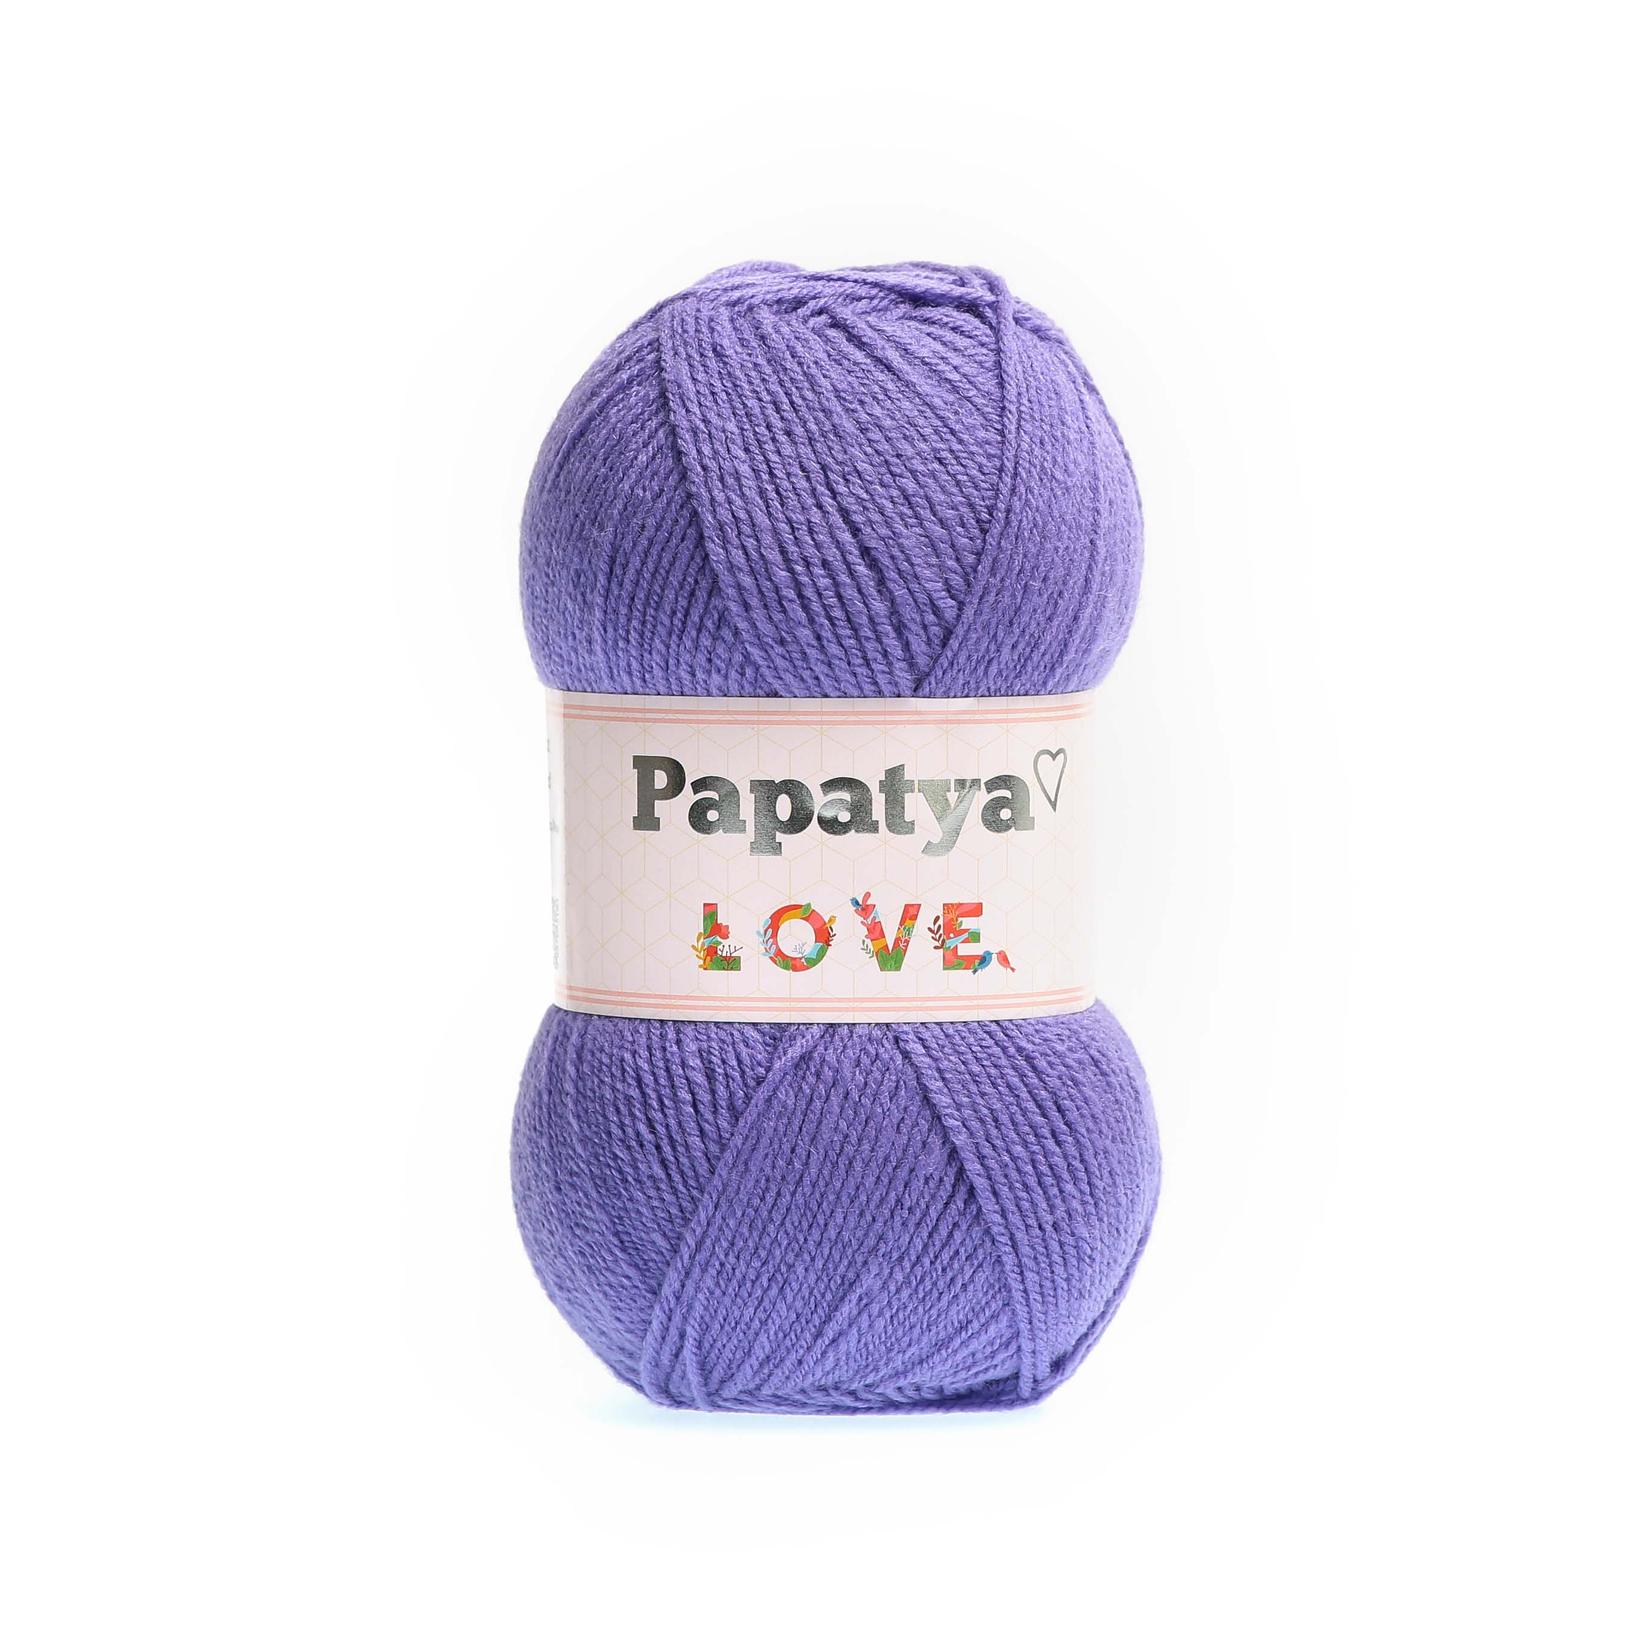 Selected image for PAPATYA Vunica Love 4580